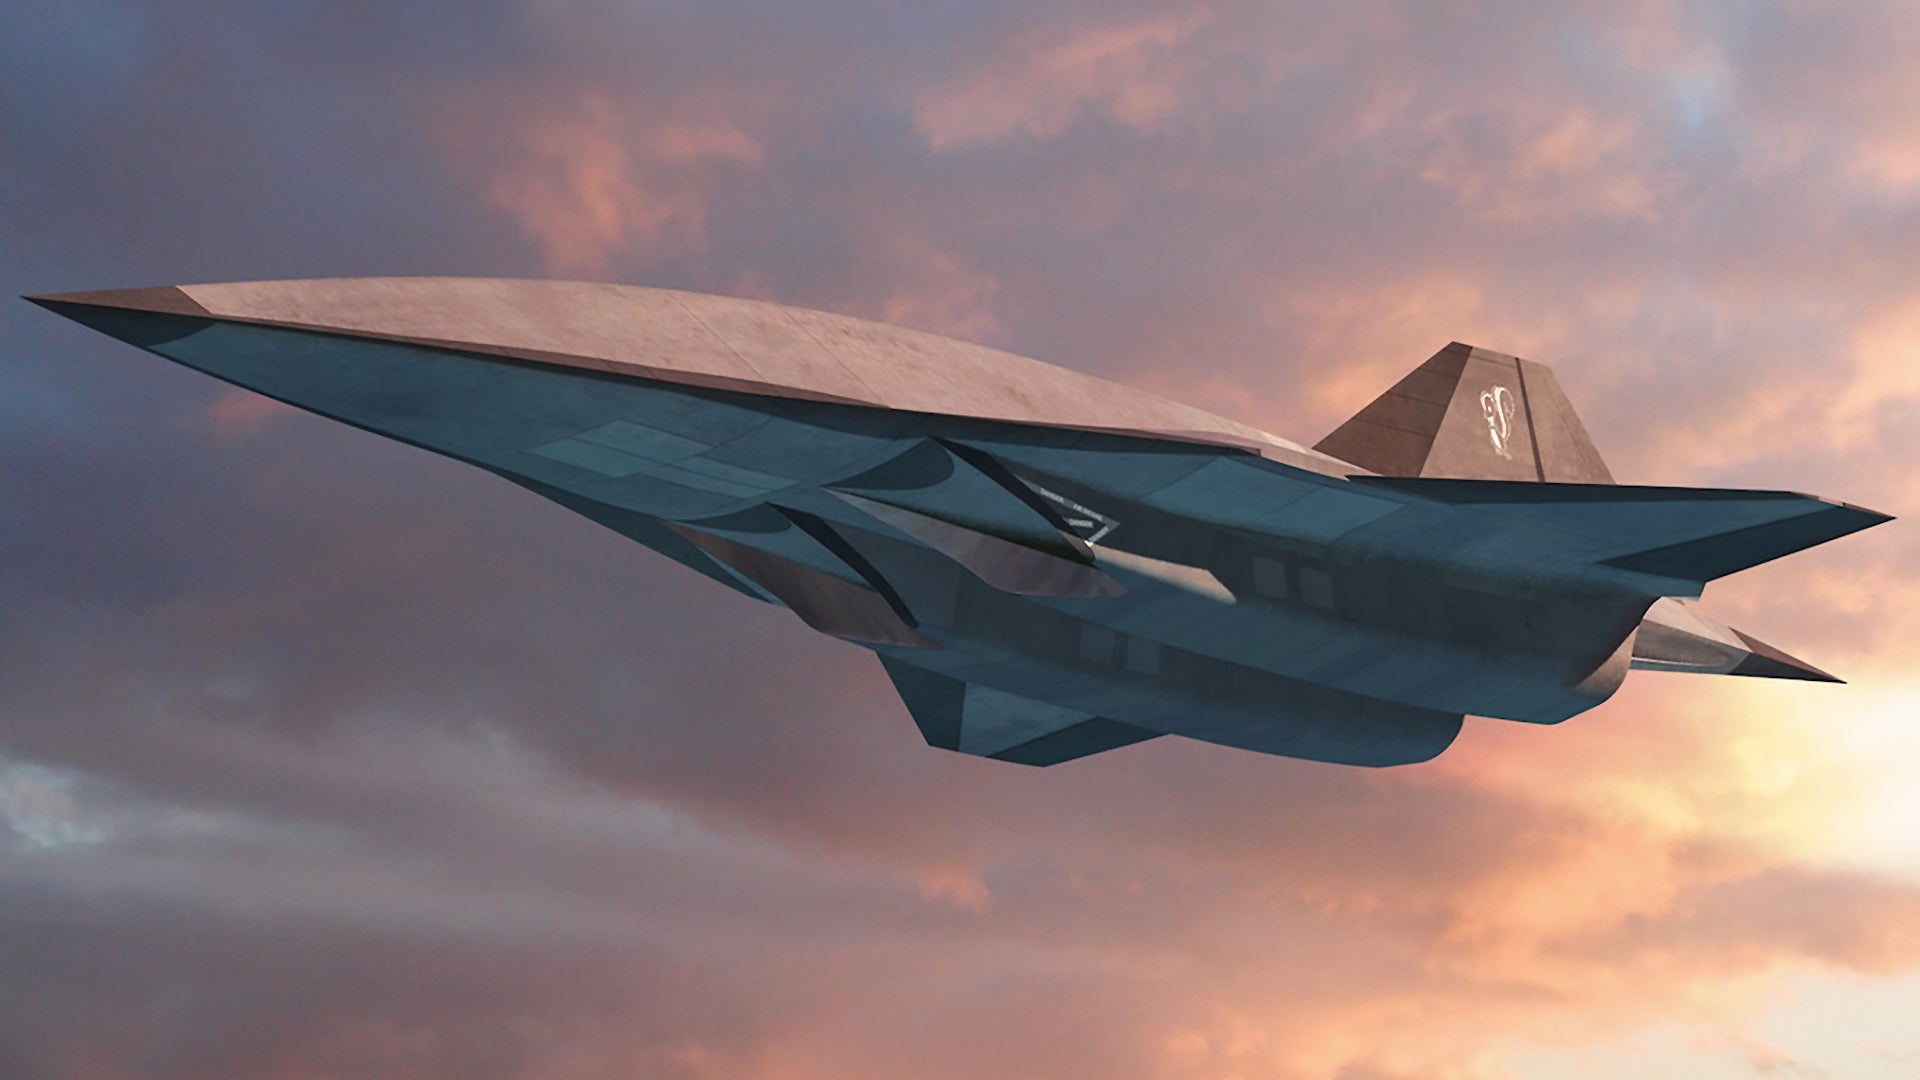 Let’s Talk About The Supposed Sighting Of A Skunk Works Hypersonic Test Aircraft